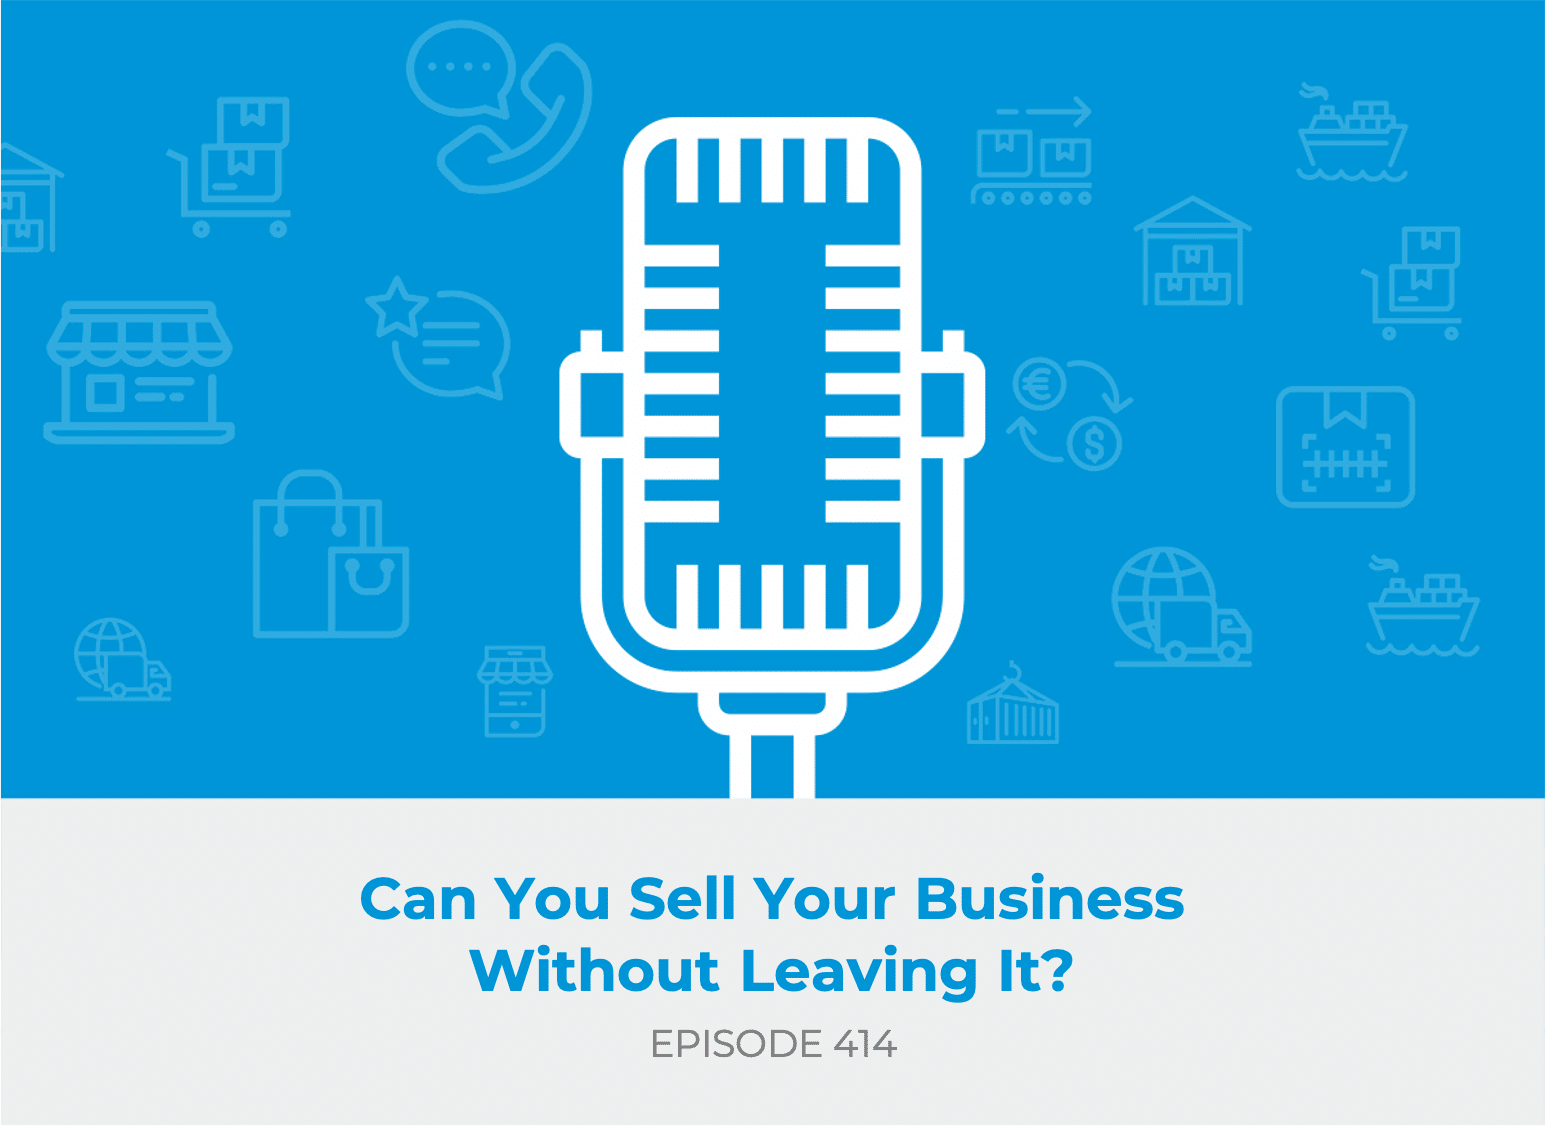 Can You Sell Your Business Without Leaving It?